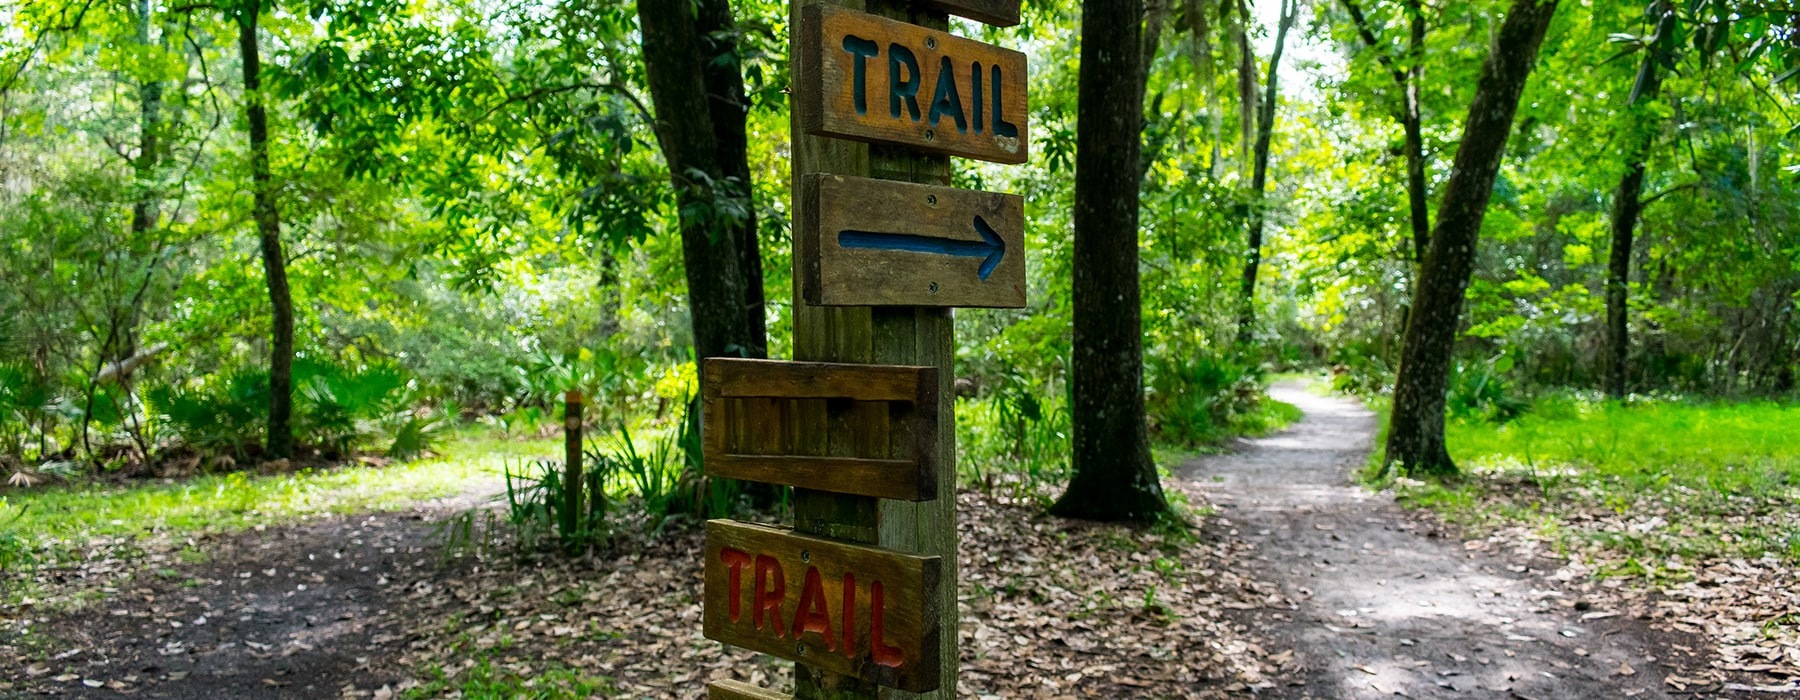 image of trail signs in a bright woods area